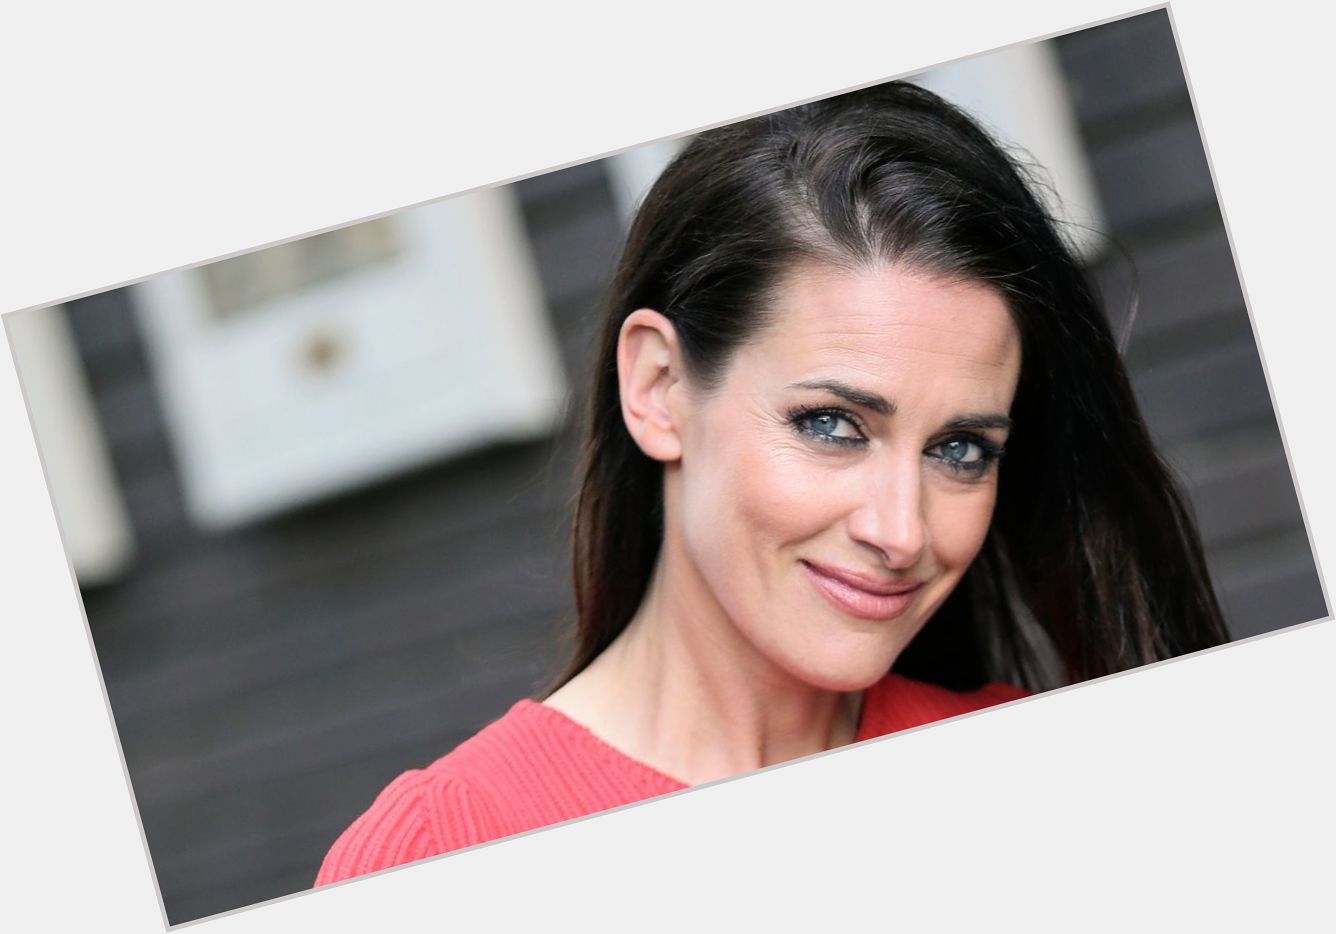 Happy Birthday to the beautiful Kirsty Gallacher. A very sexy lady. 